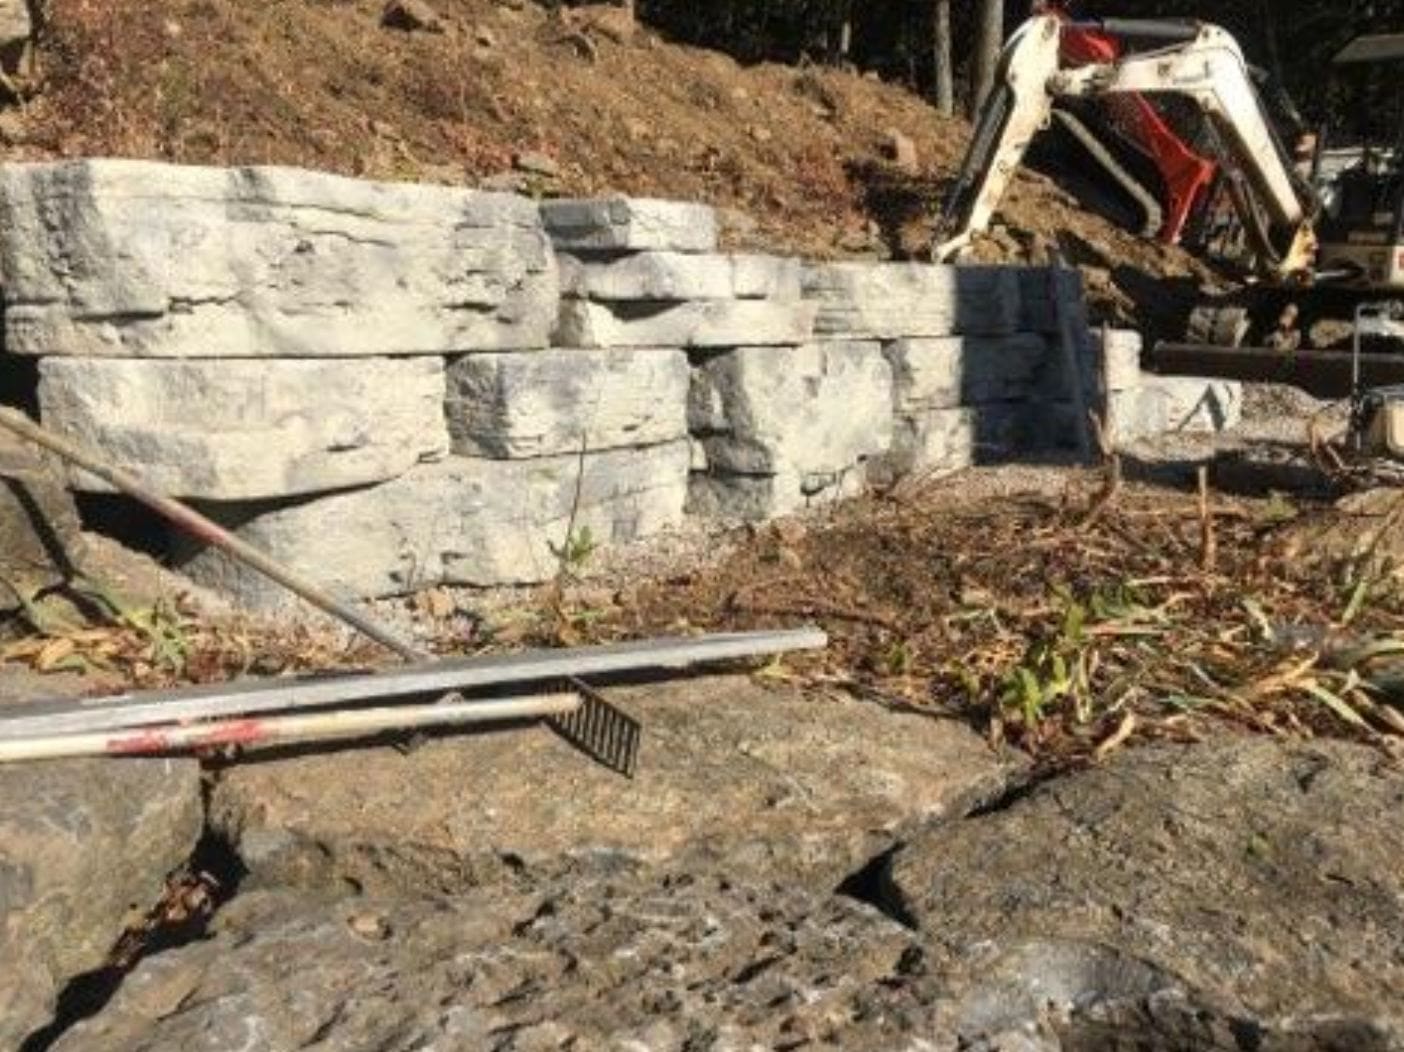 A construction site with a pile of rocks and a shovel.